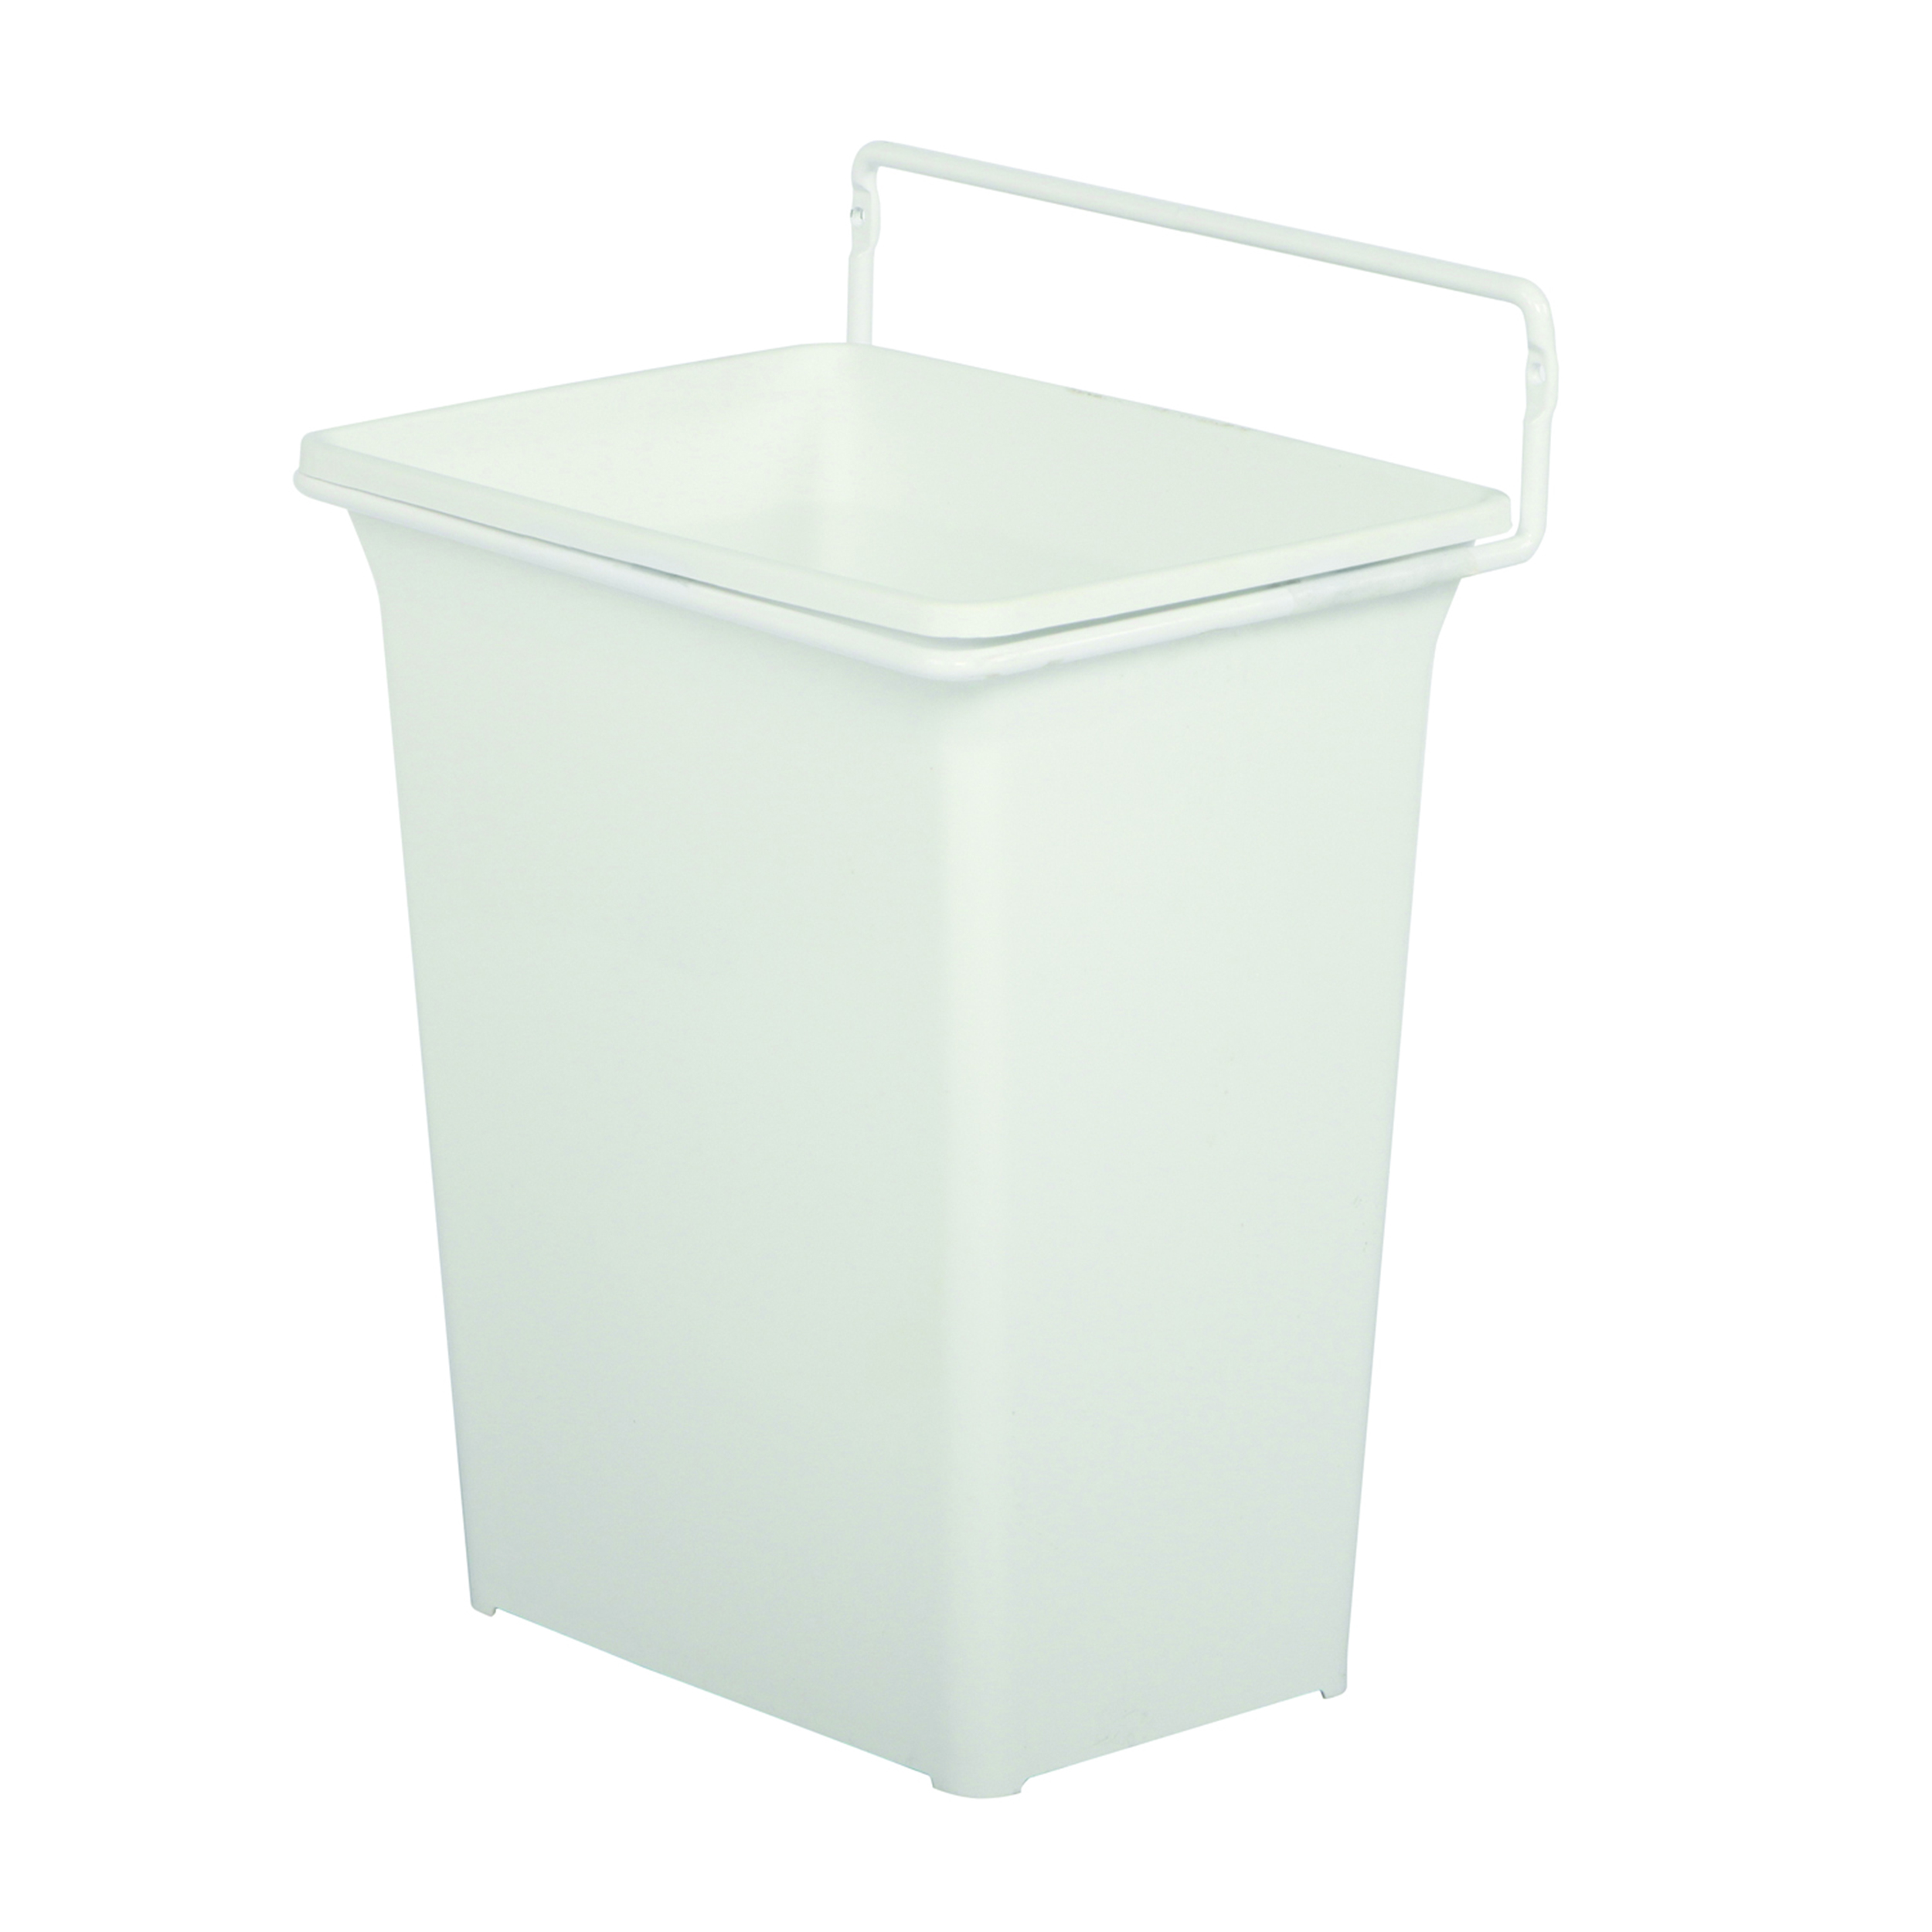 Real Solutions Single 9qt Door-mounted Waste & Recyling Unit, White